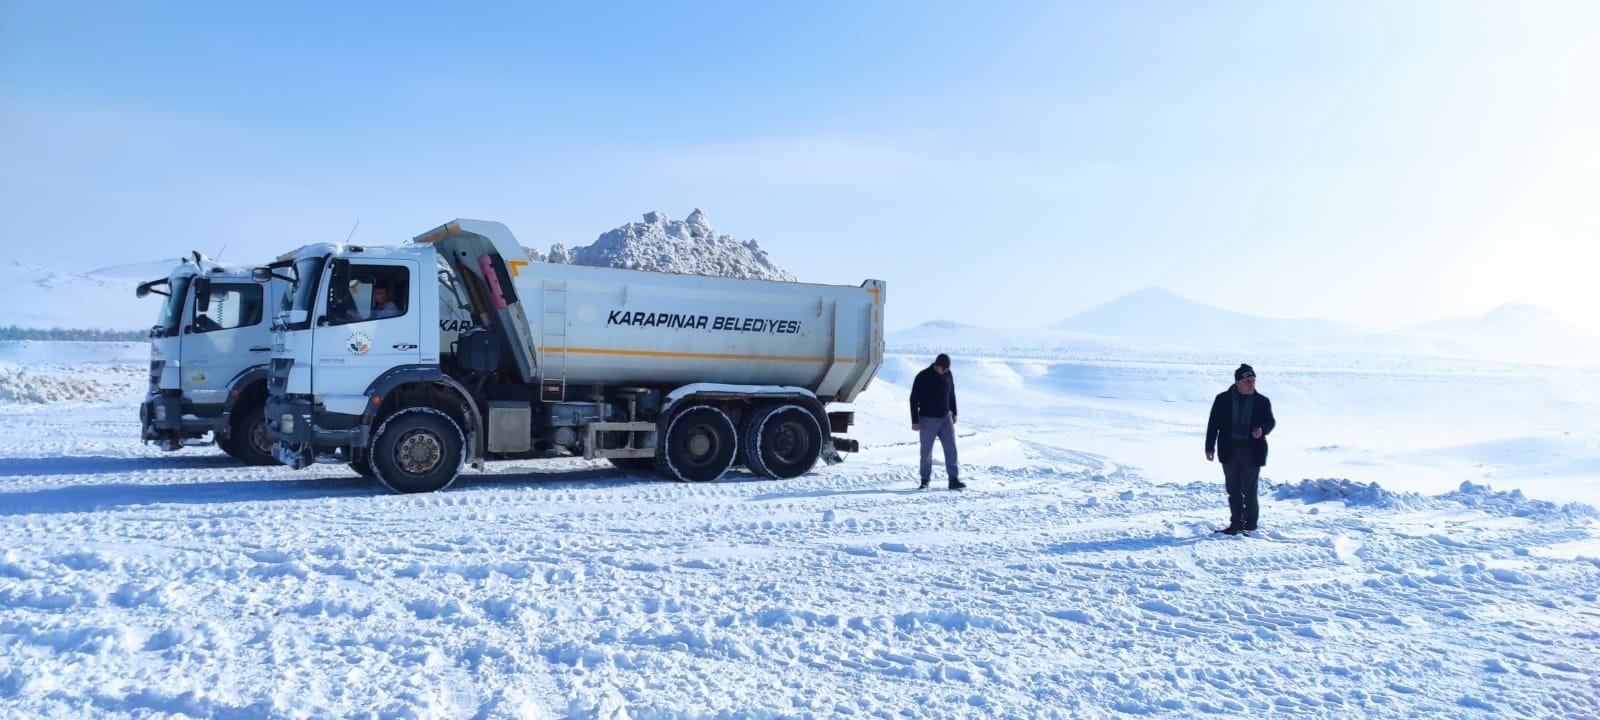 This file image provided on Feb. 7 shows municipality crews from the Karapınar district in the central province of Konya dumping snow near a lake. (DHA Photo)